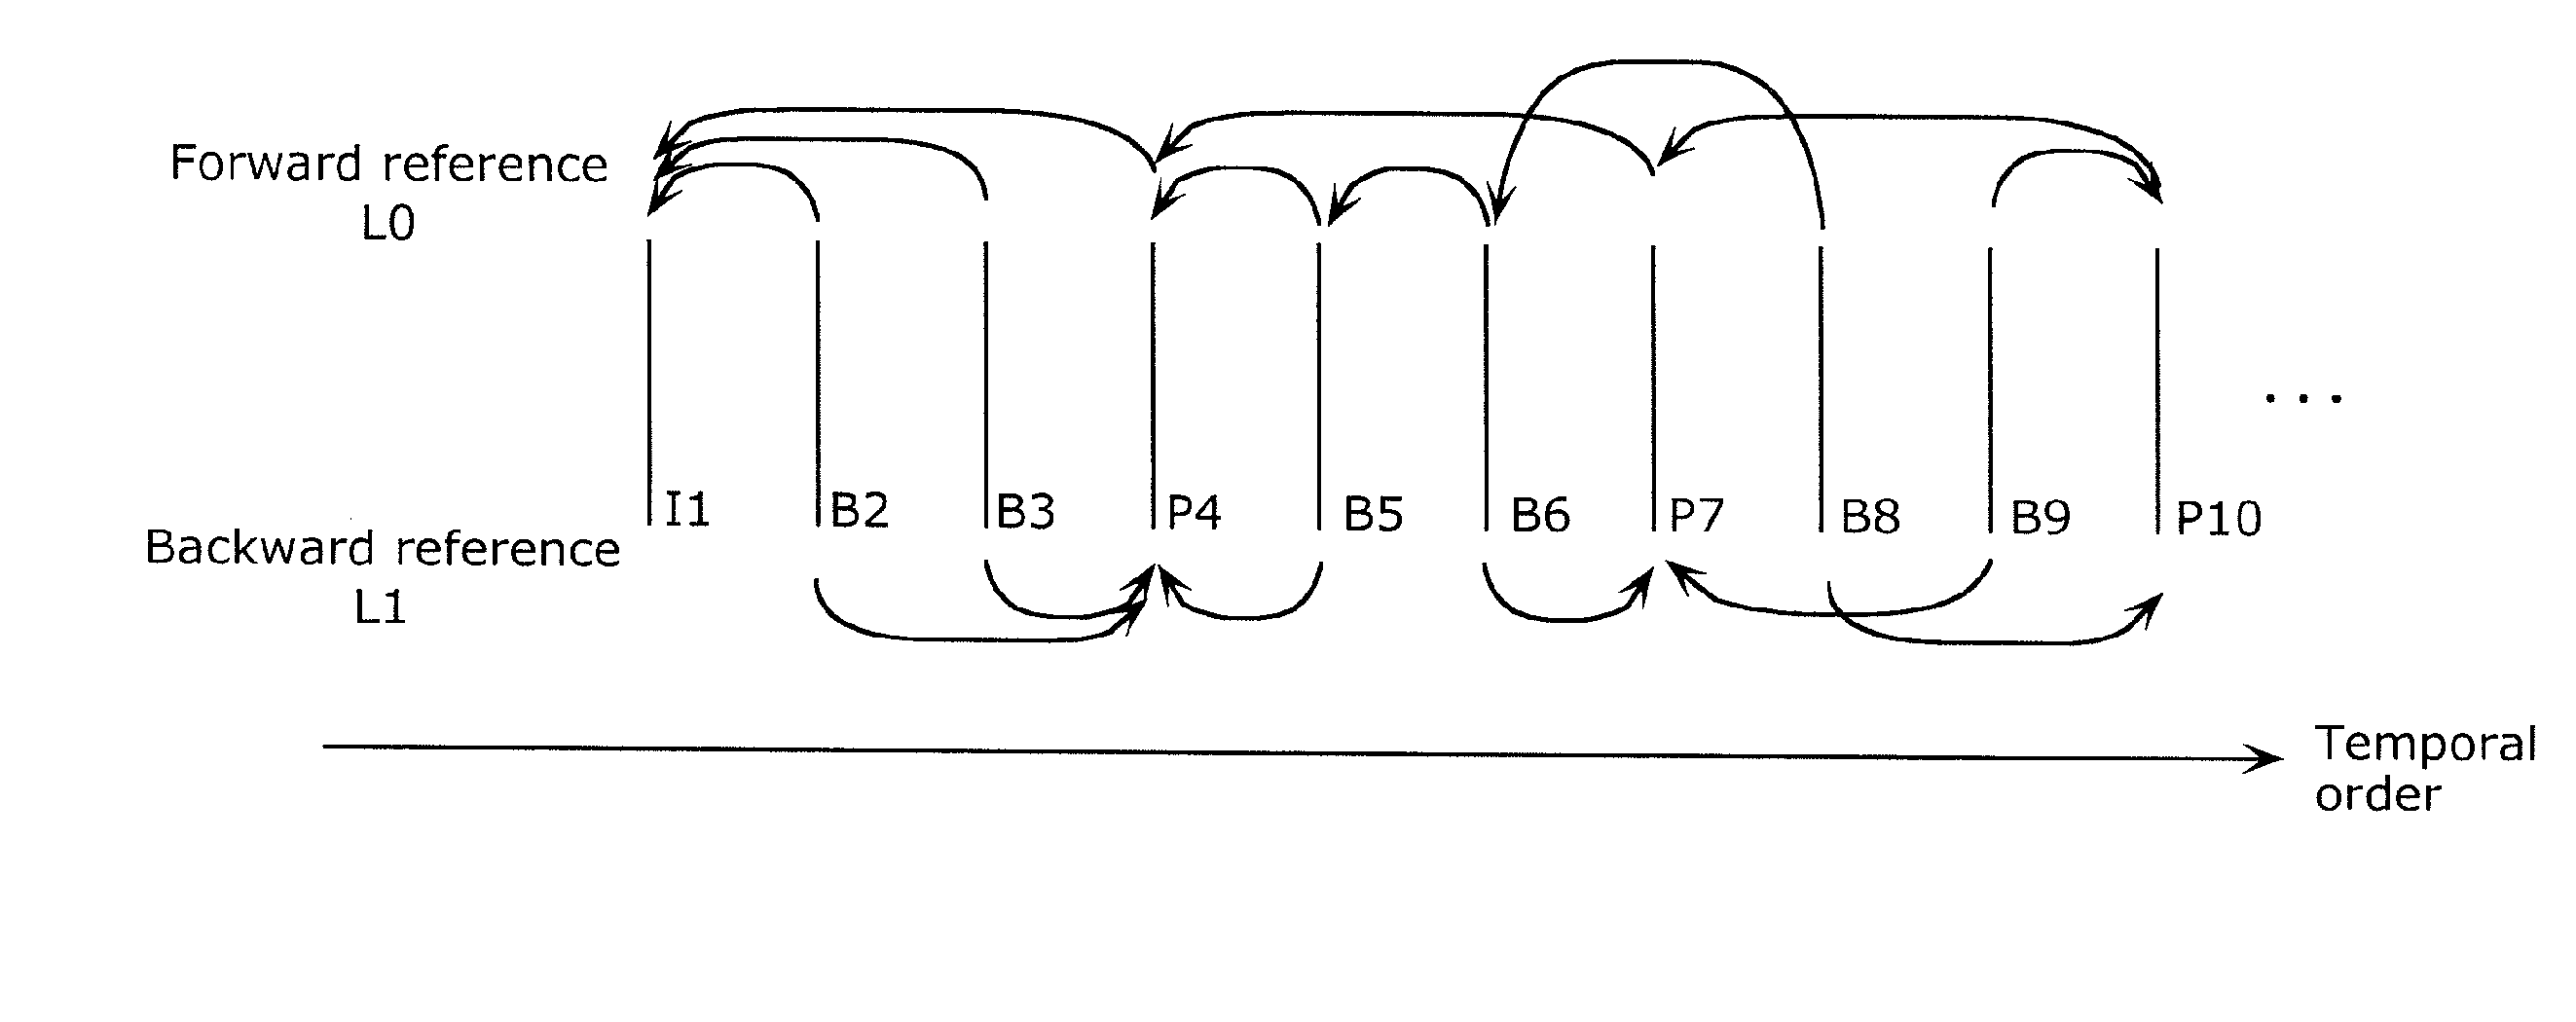 Moving picture decoding apparatus